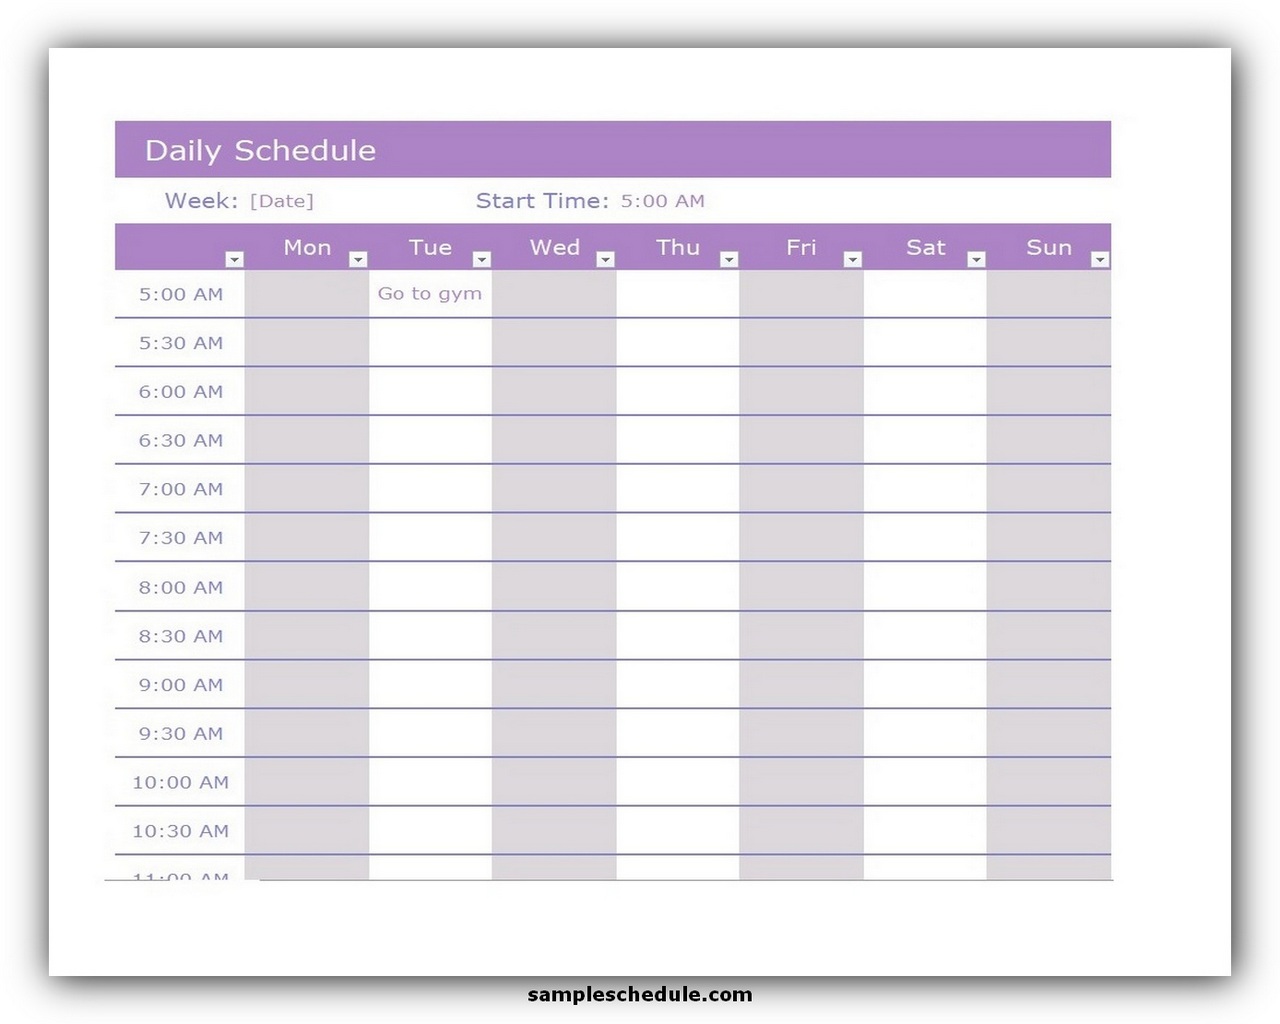 schedule template free daily vector